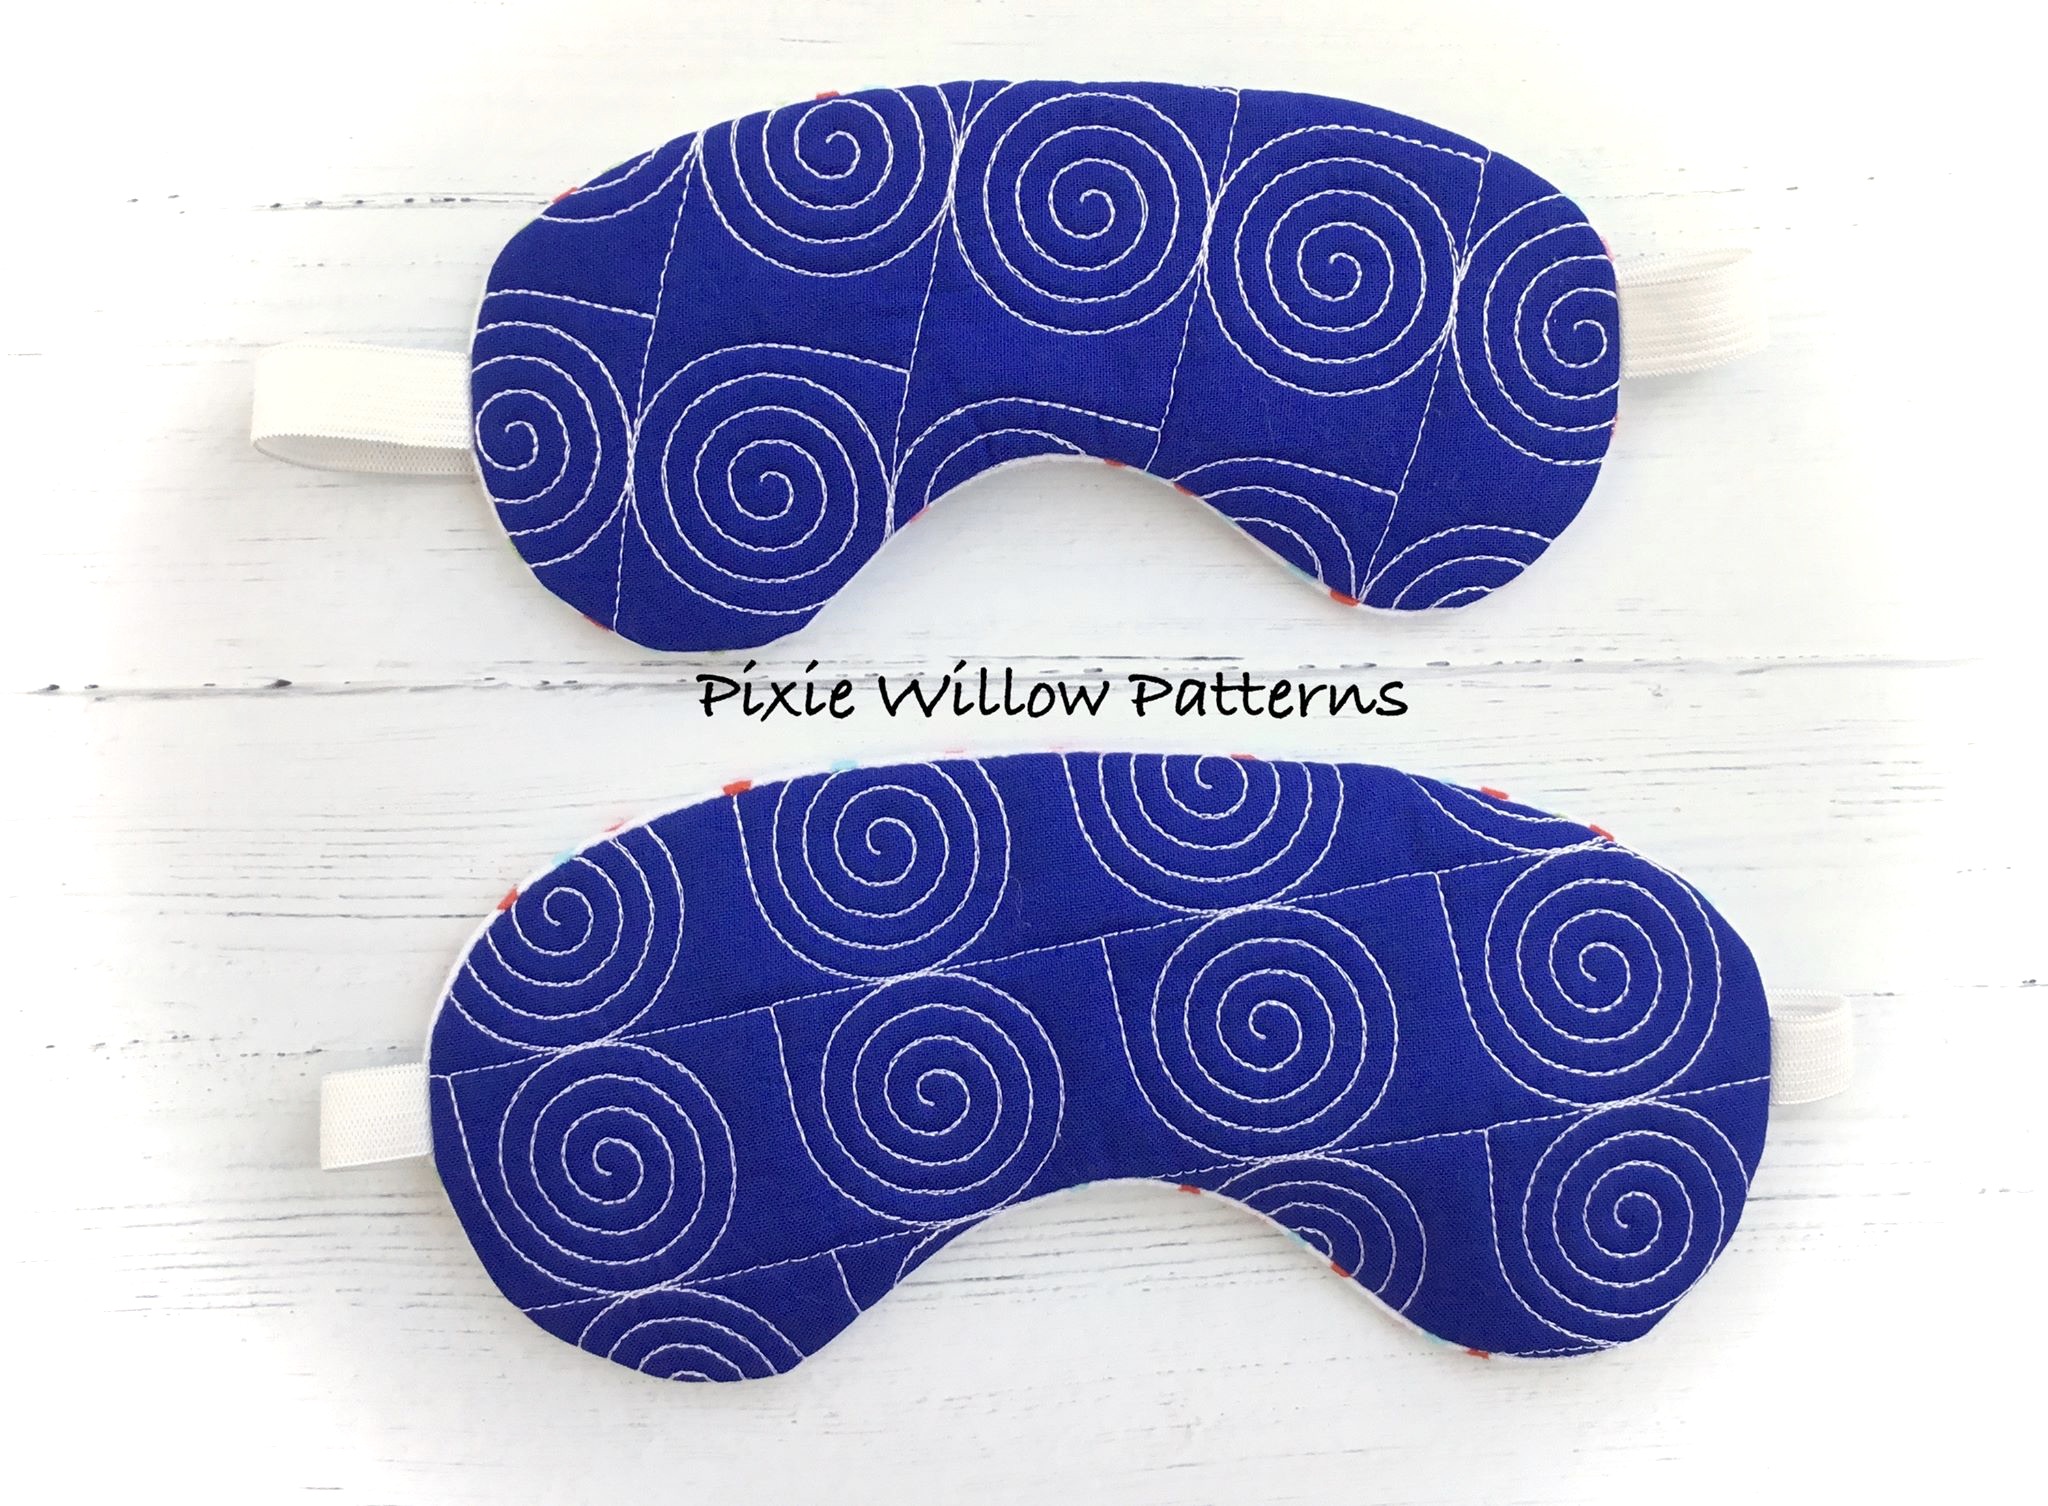 ITH Sleep Mask. In the hoop, machine embroidery quilted sleeping mask pattern 5×7 – Pixie Willow Patterns